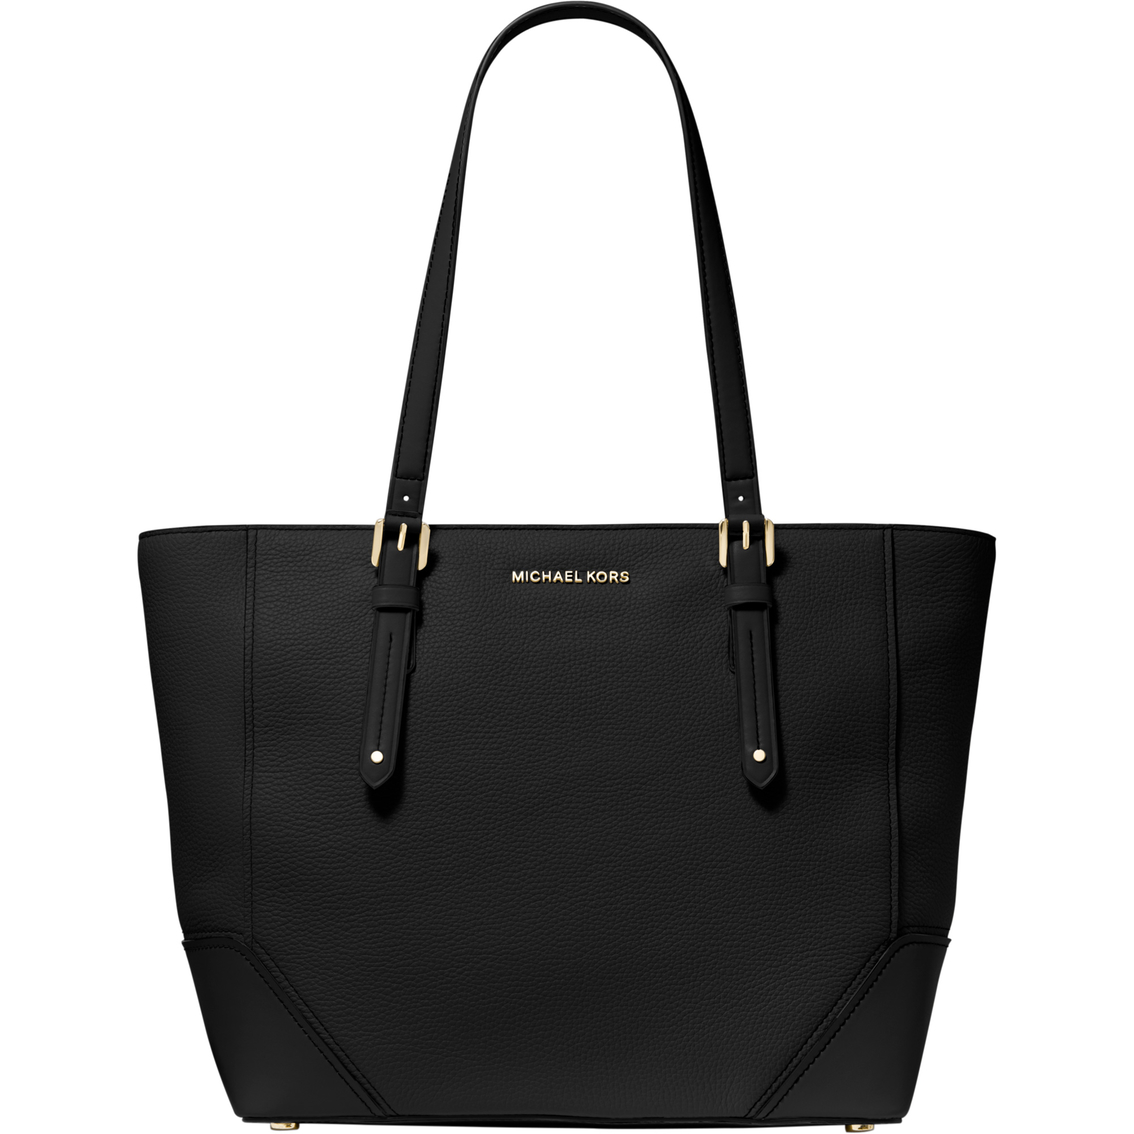 Michael Kors Aria Large Leather Tote | Totes & Shoppers | Handbags & Accessories | Shop The Exchange